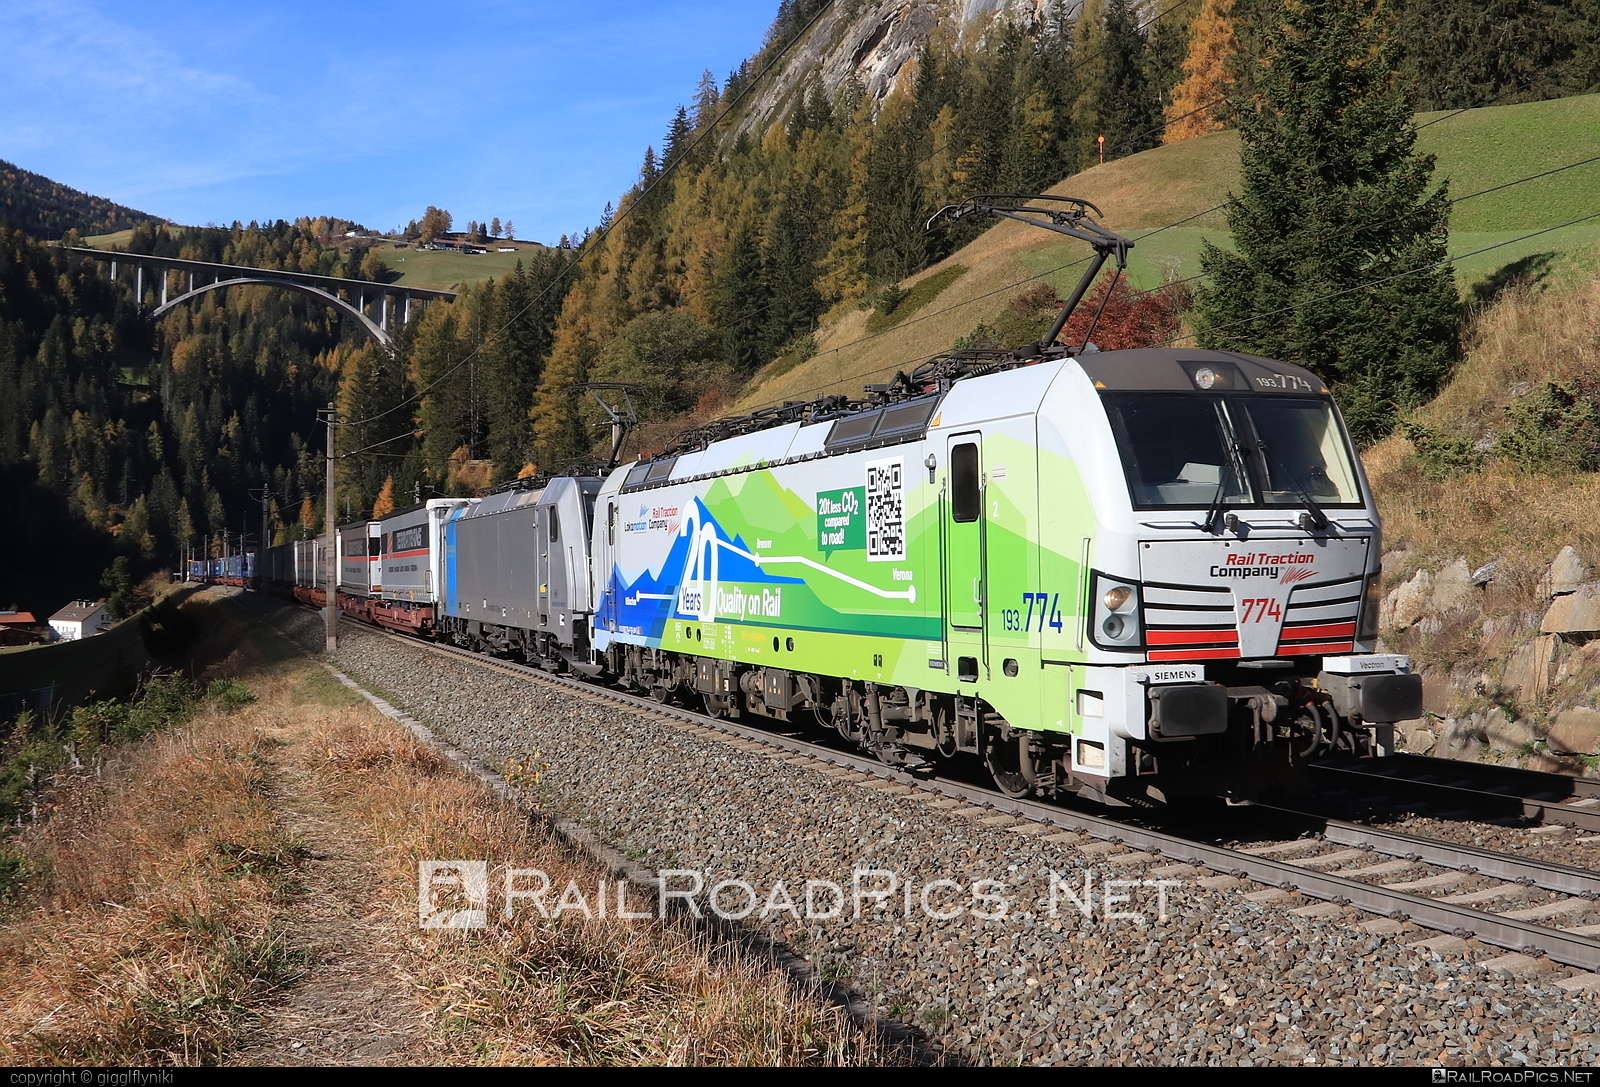 Siemens Vectron MS - 193 774 operated by Rail Traction Company #LokomotionGesellschaftFurSchienentraktion #RailTractionCompany #flatwagon #lokomotion #rtc #semitrailer #siemens #siemensVectron #siemensVectronMS #vectron #vectronMS